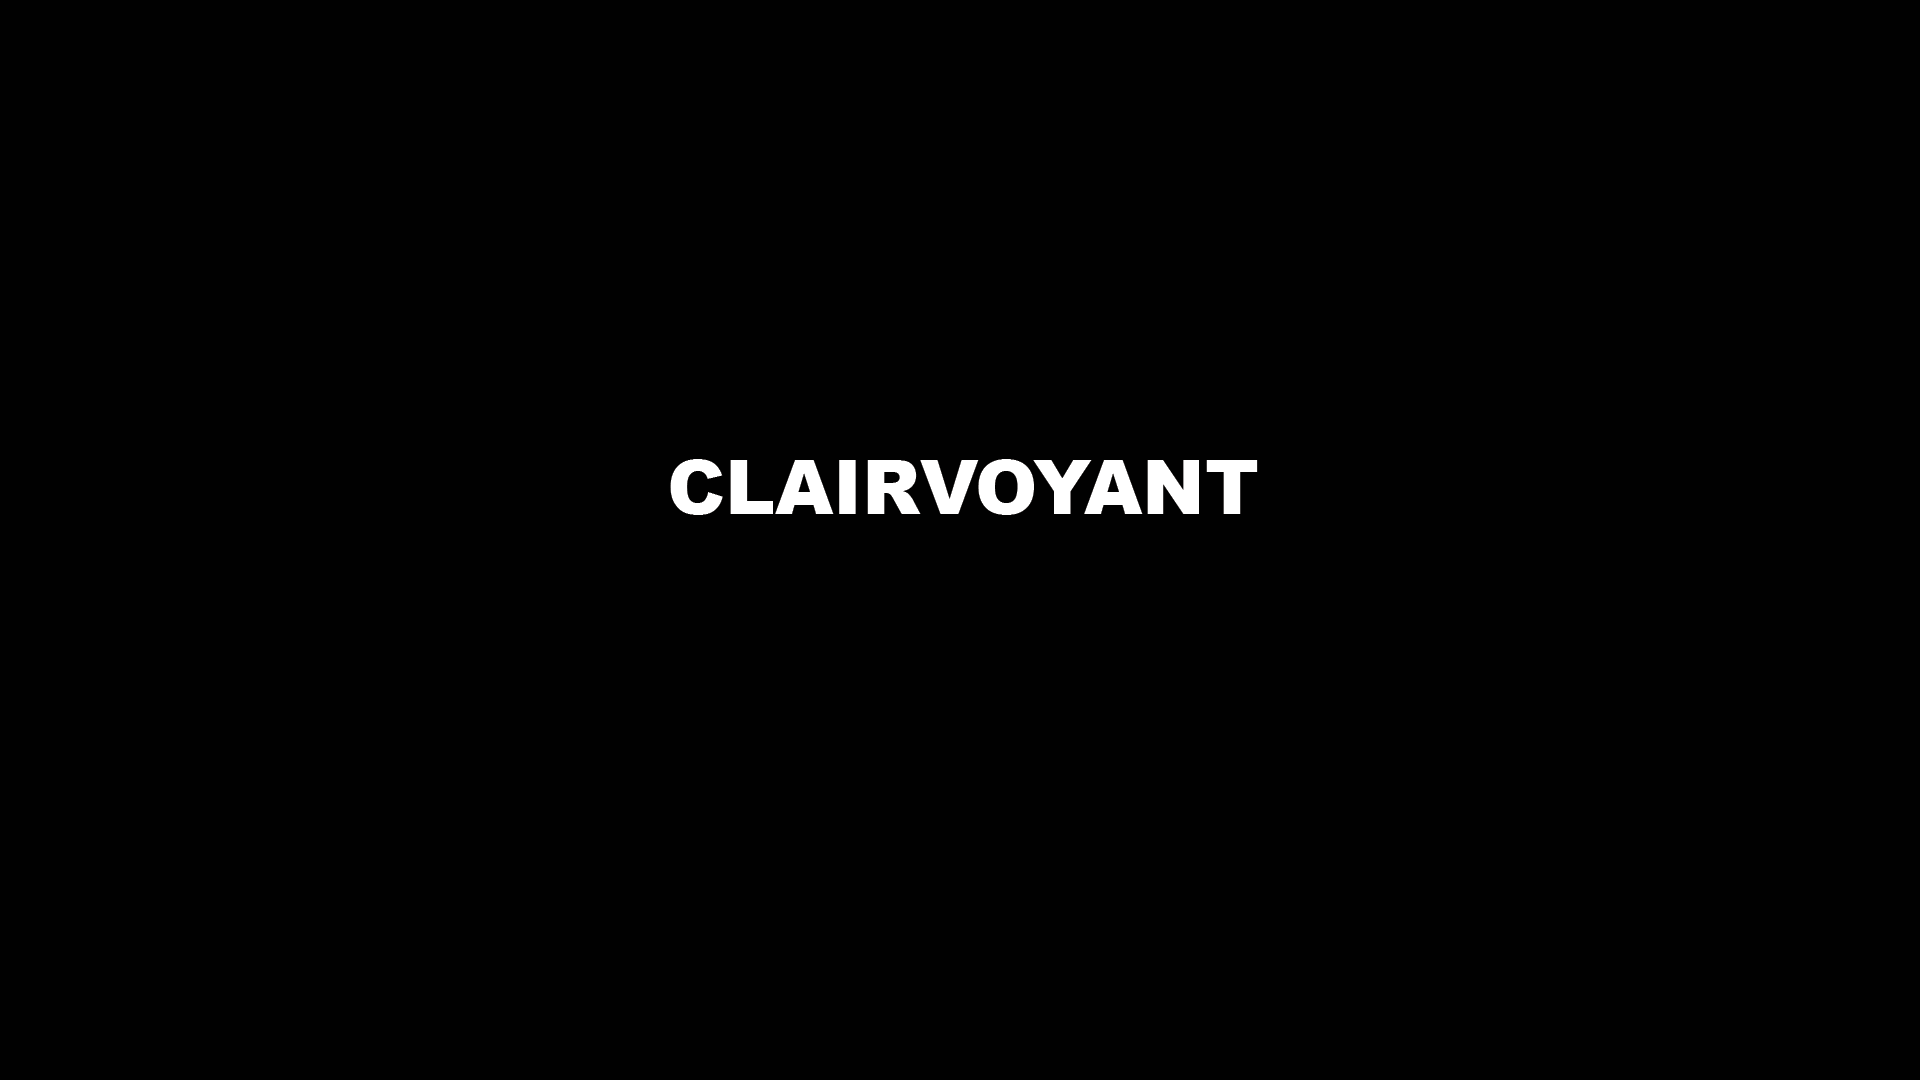 CLAIRVOYANT 5 by 5 sec video